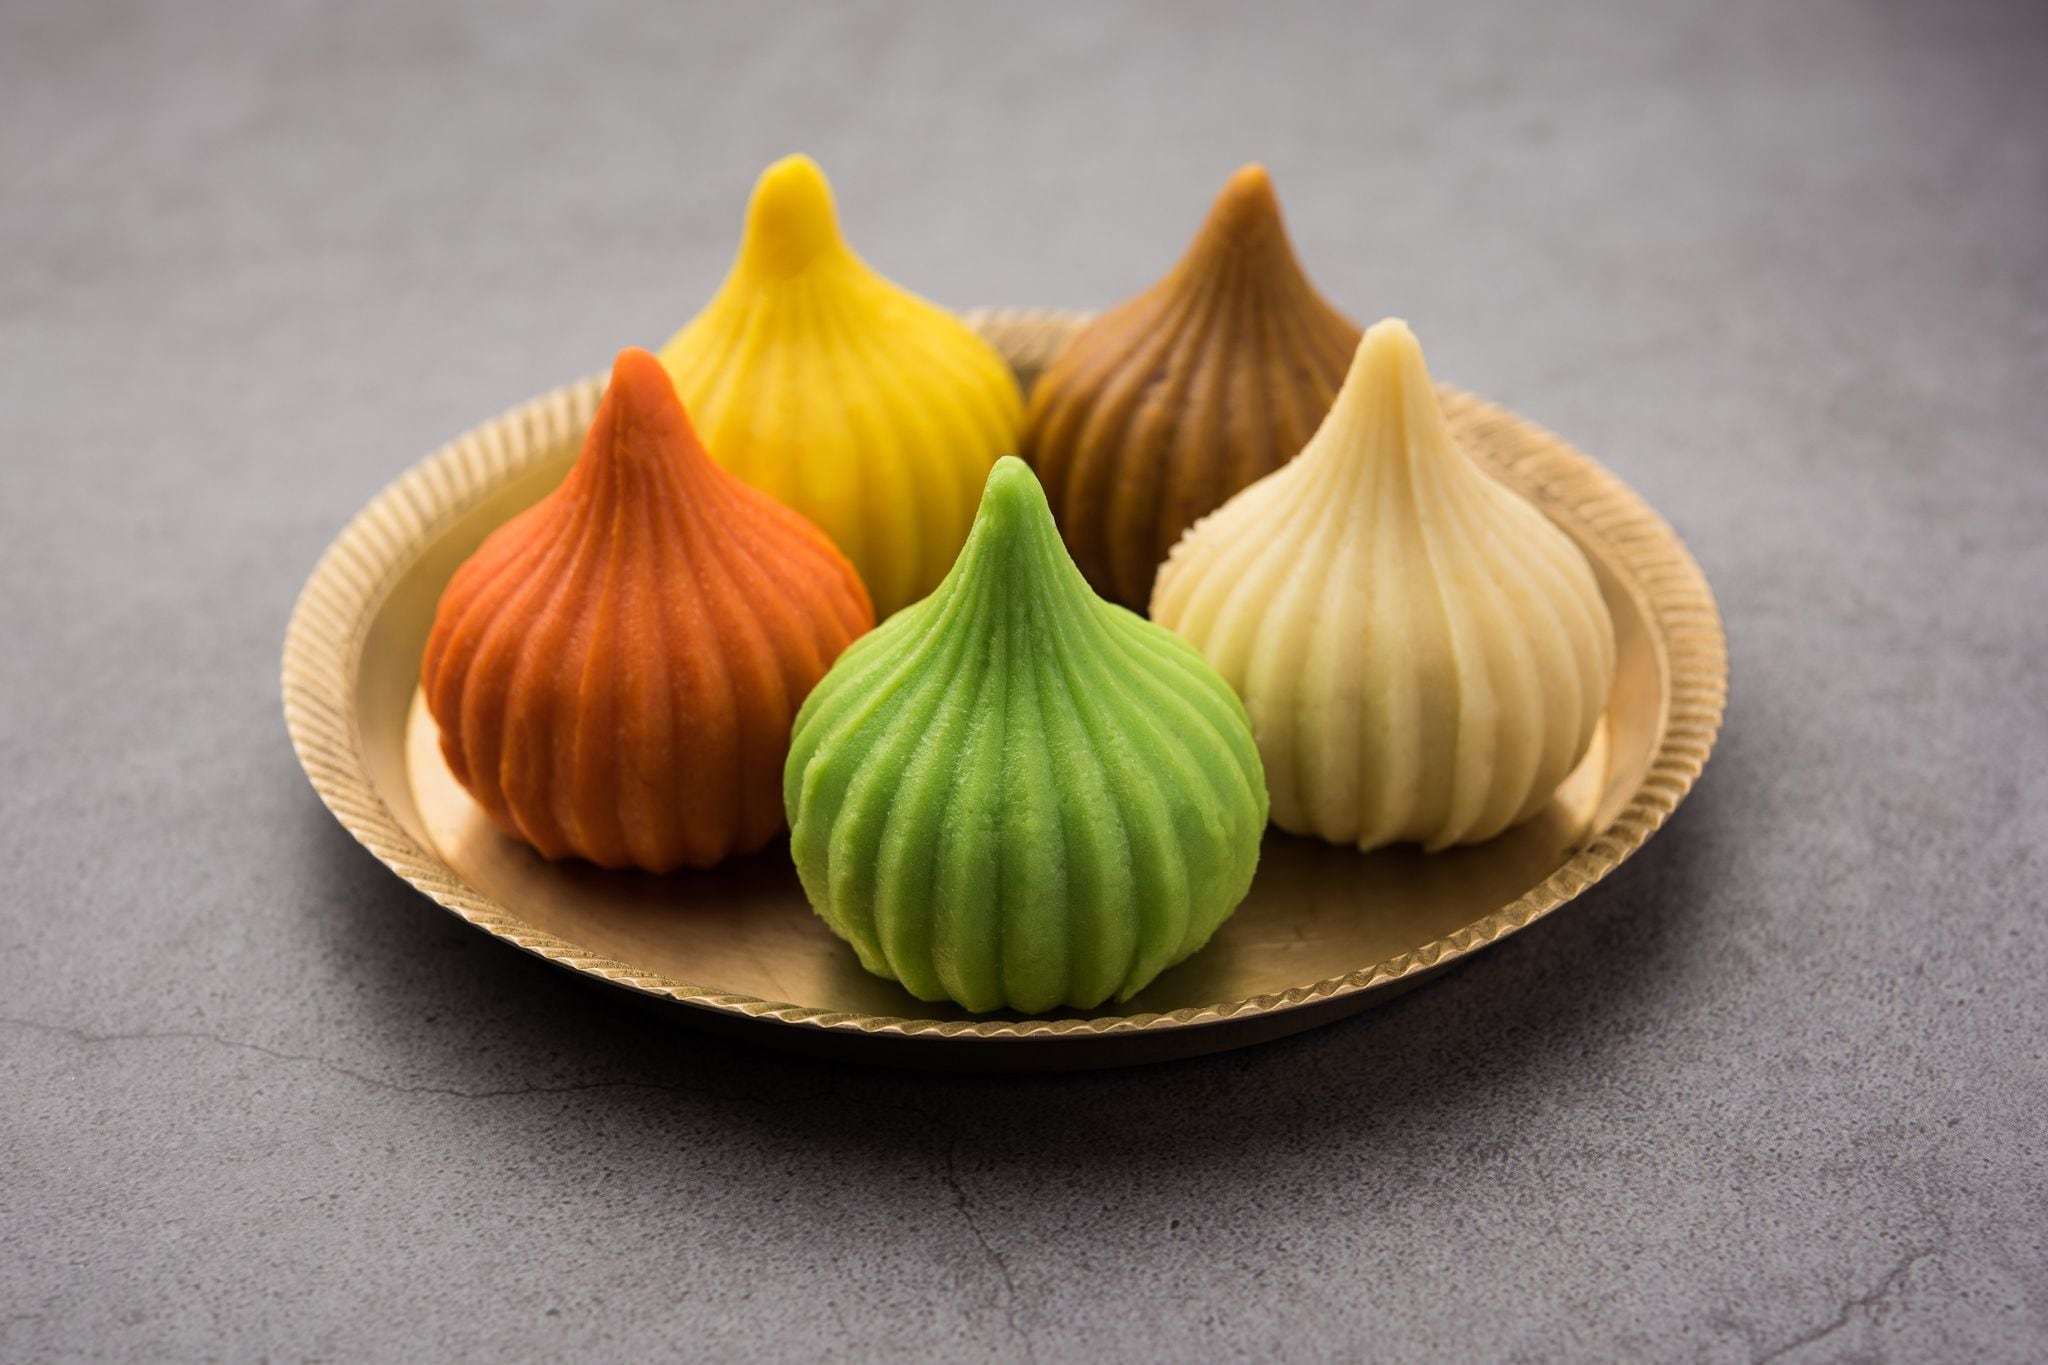 Which of these are the main ingredients in a modak?